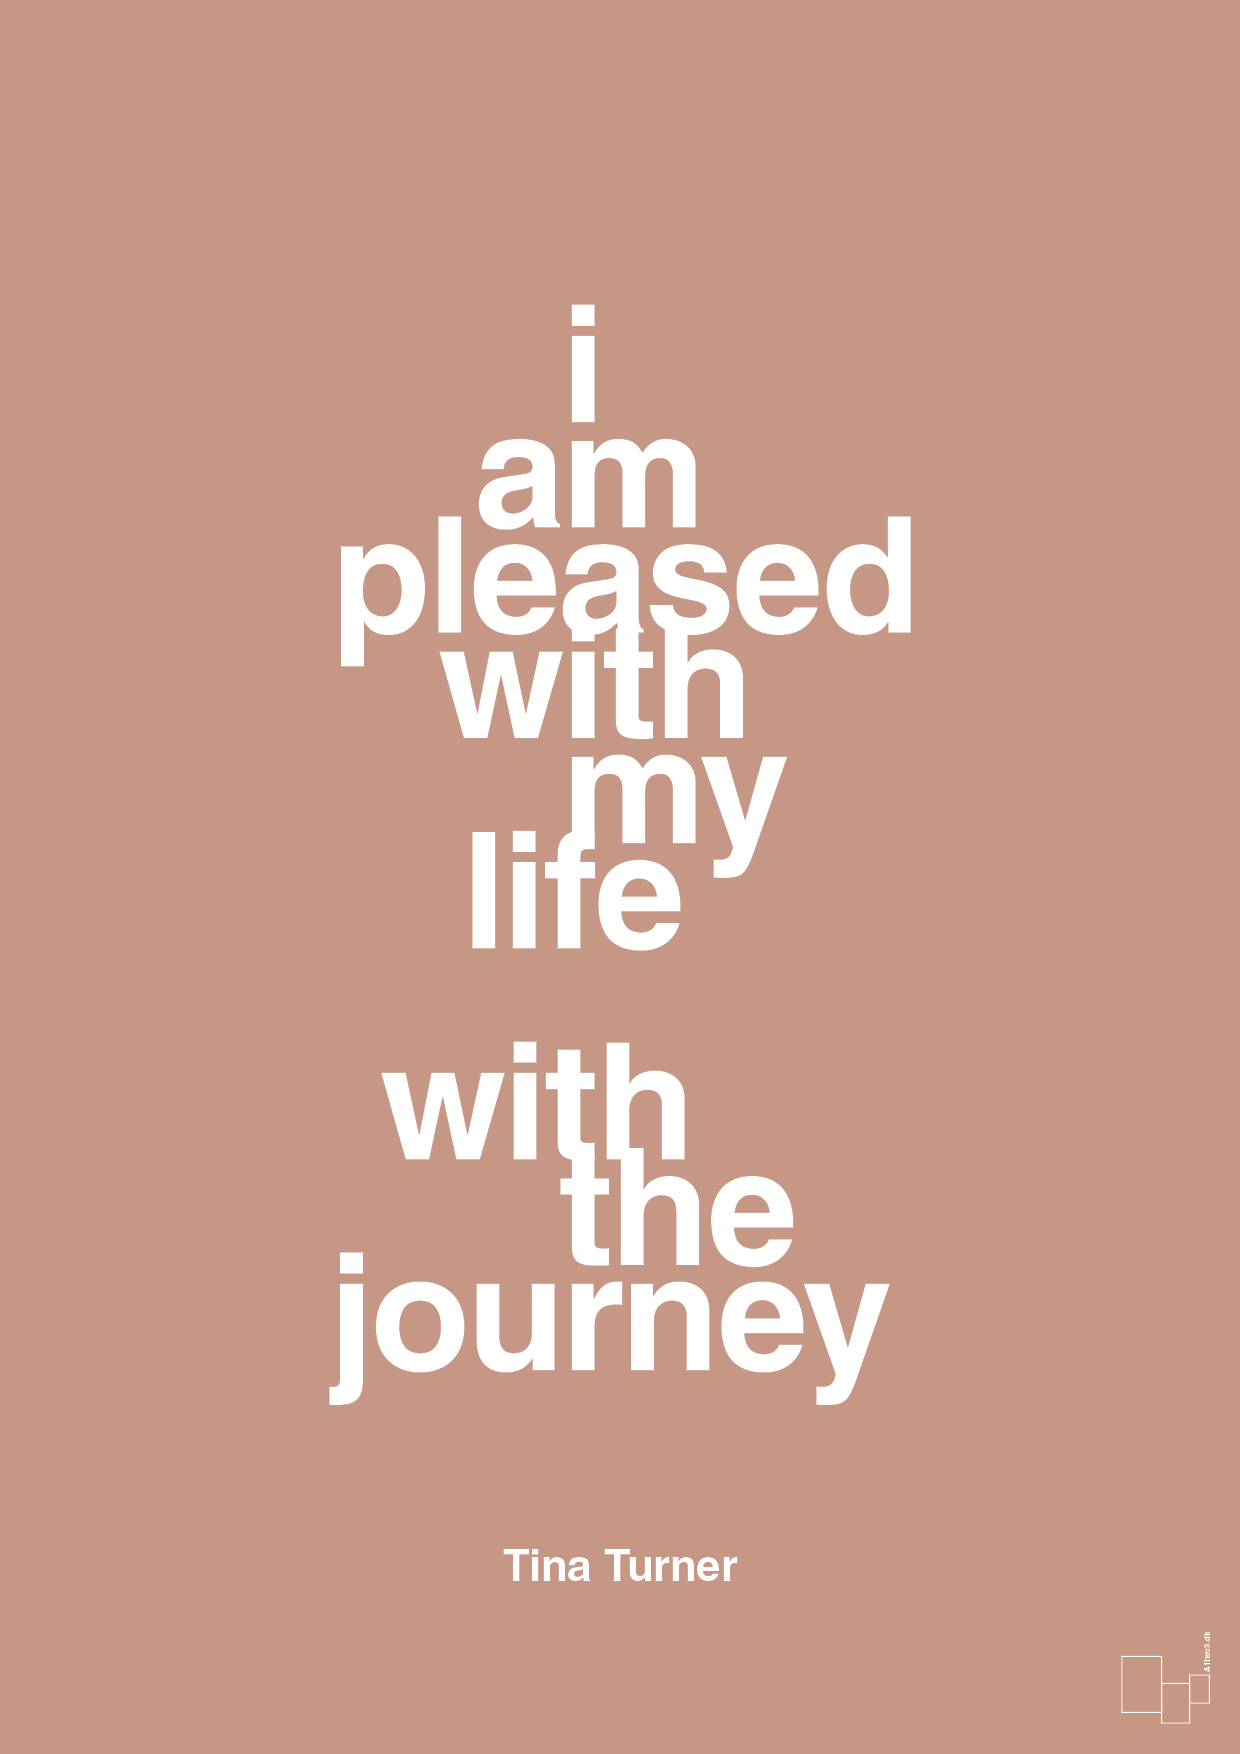 i am pleased with my life with the journey - Plakat med Citater i Powder